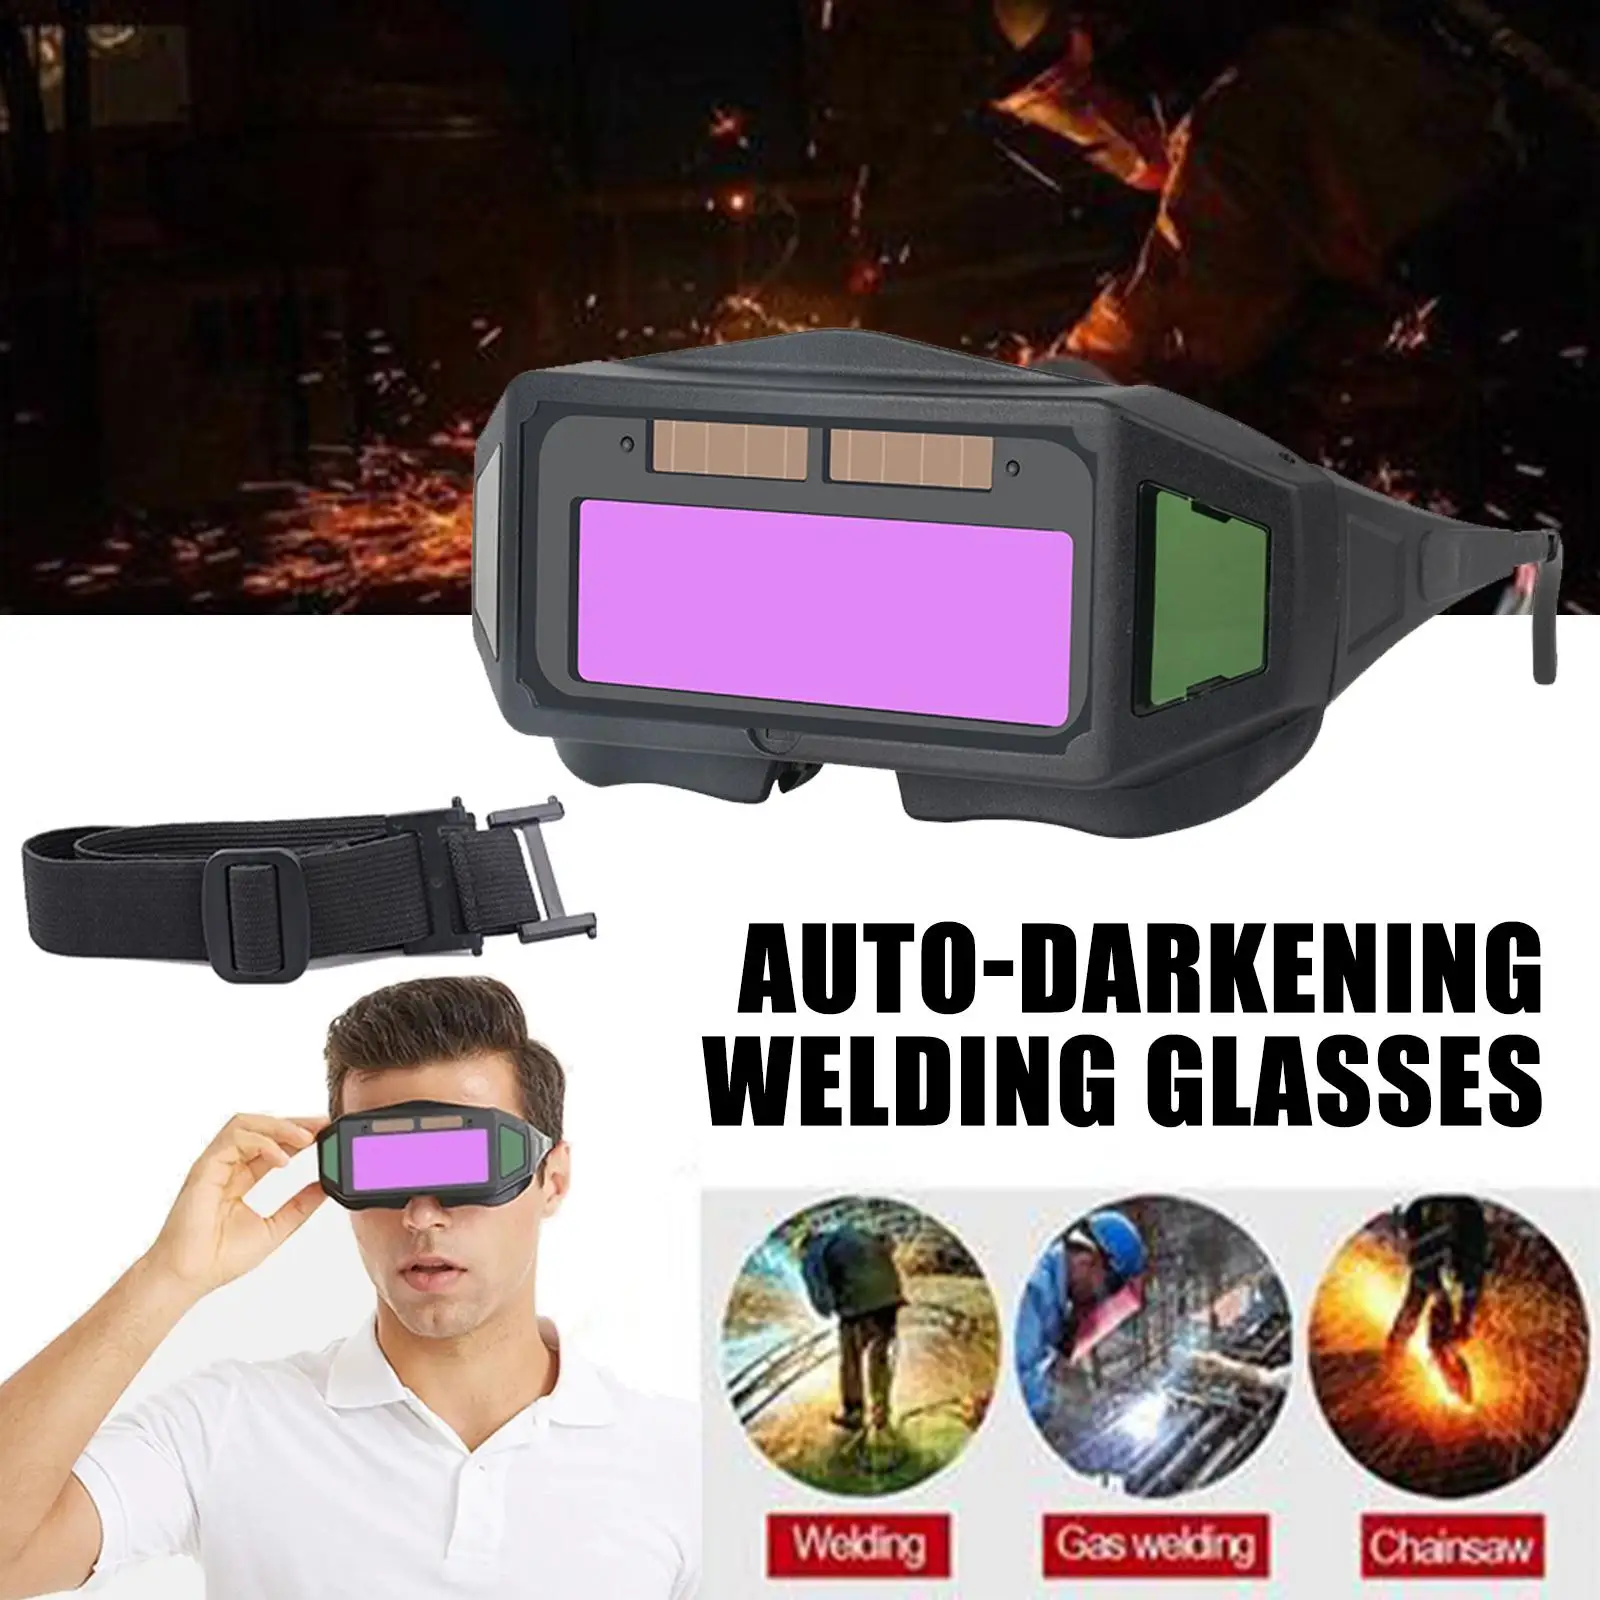 

Welding Glasses Auto Darkening Welding Goggles For Tig Mig Mma Professional Weld Glasses Goggles Multifunction Utility Tool N2m2